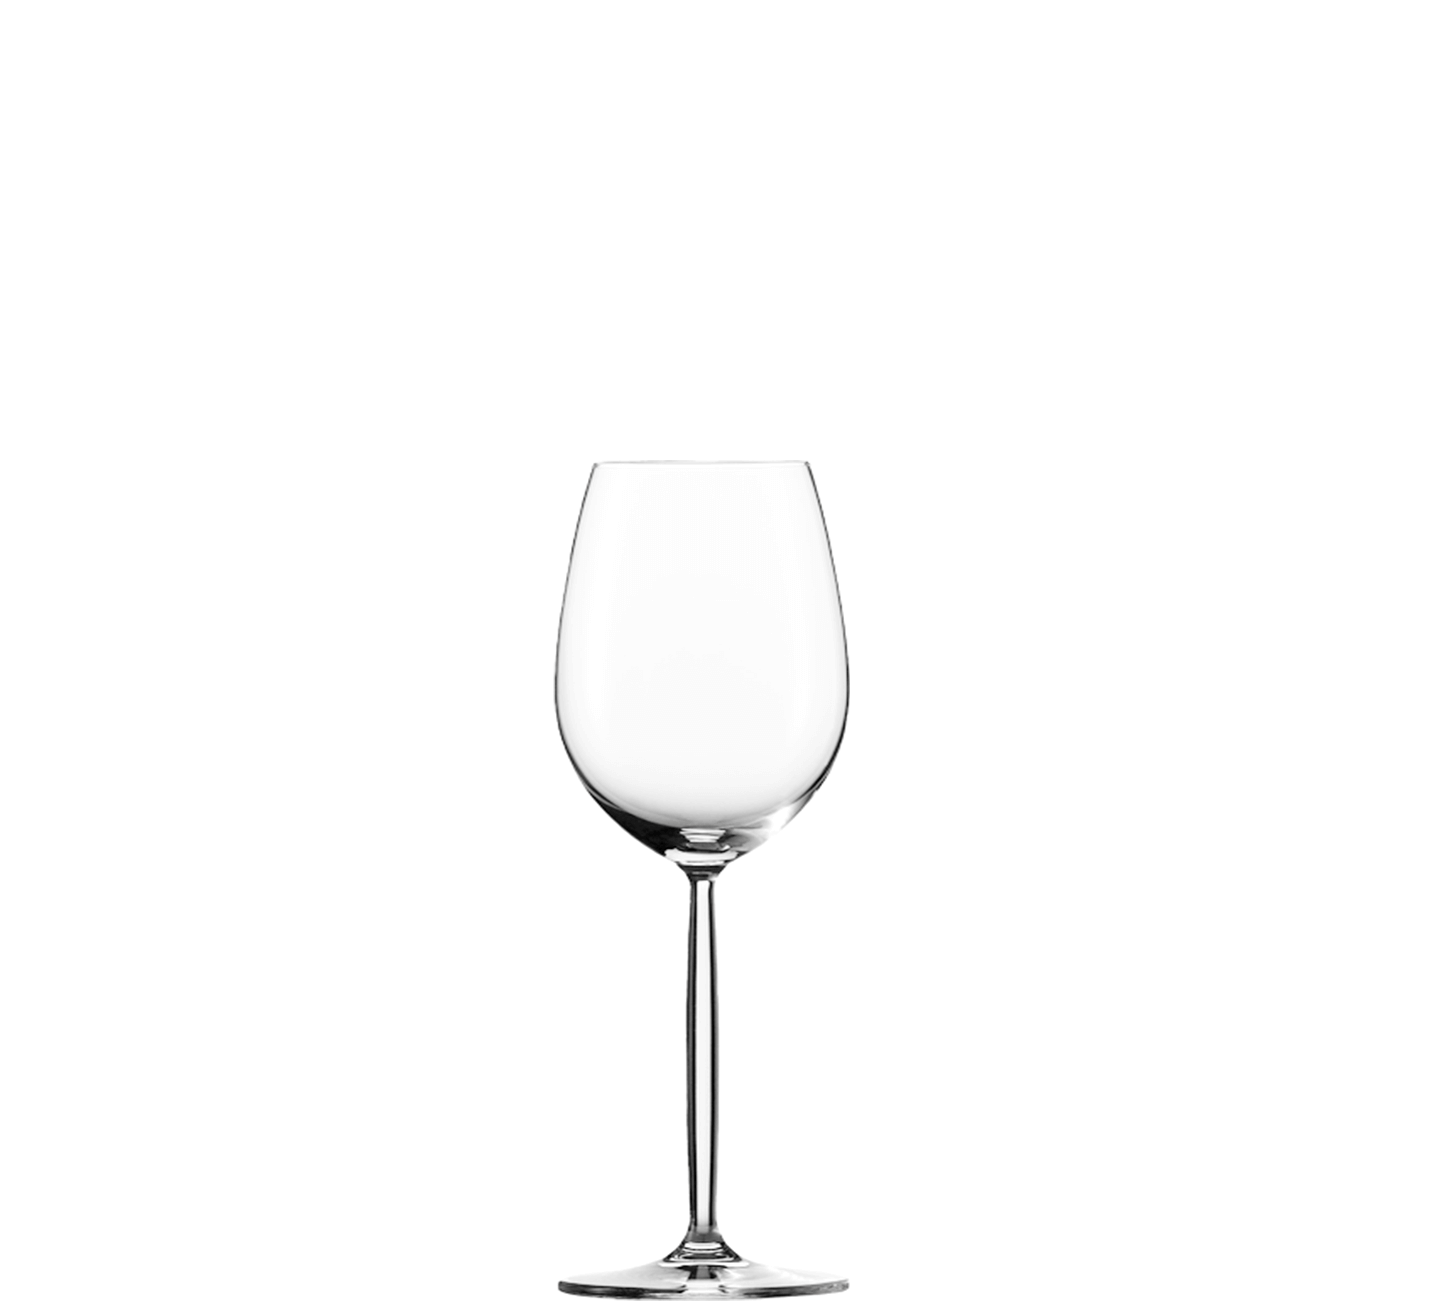 Before: a wine glass